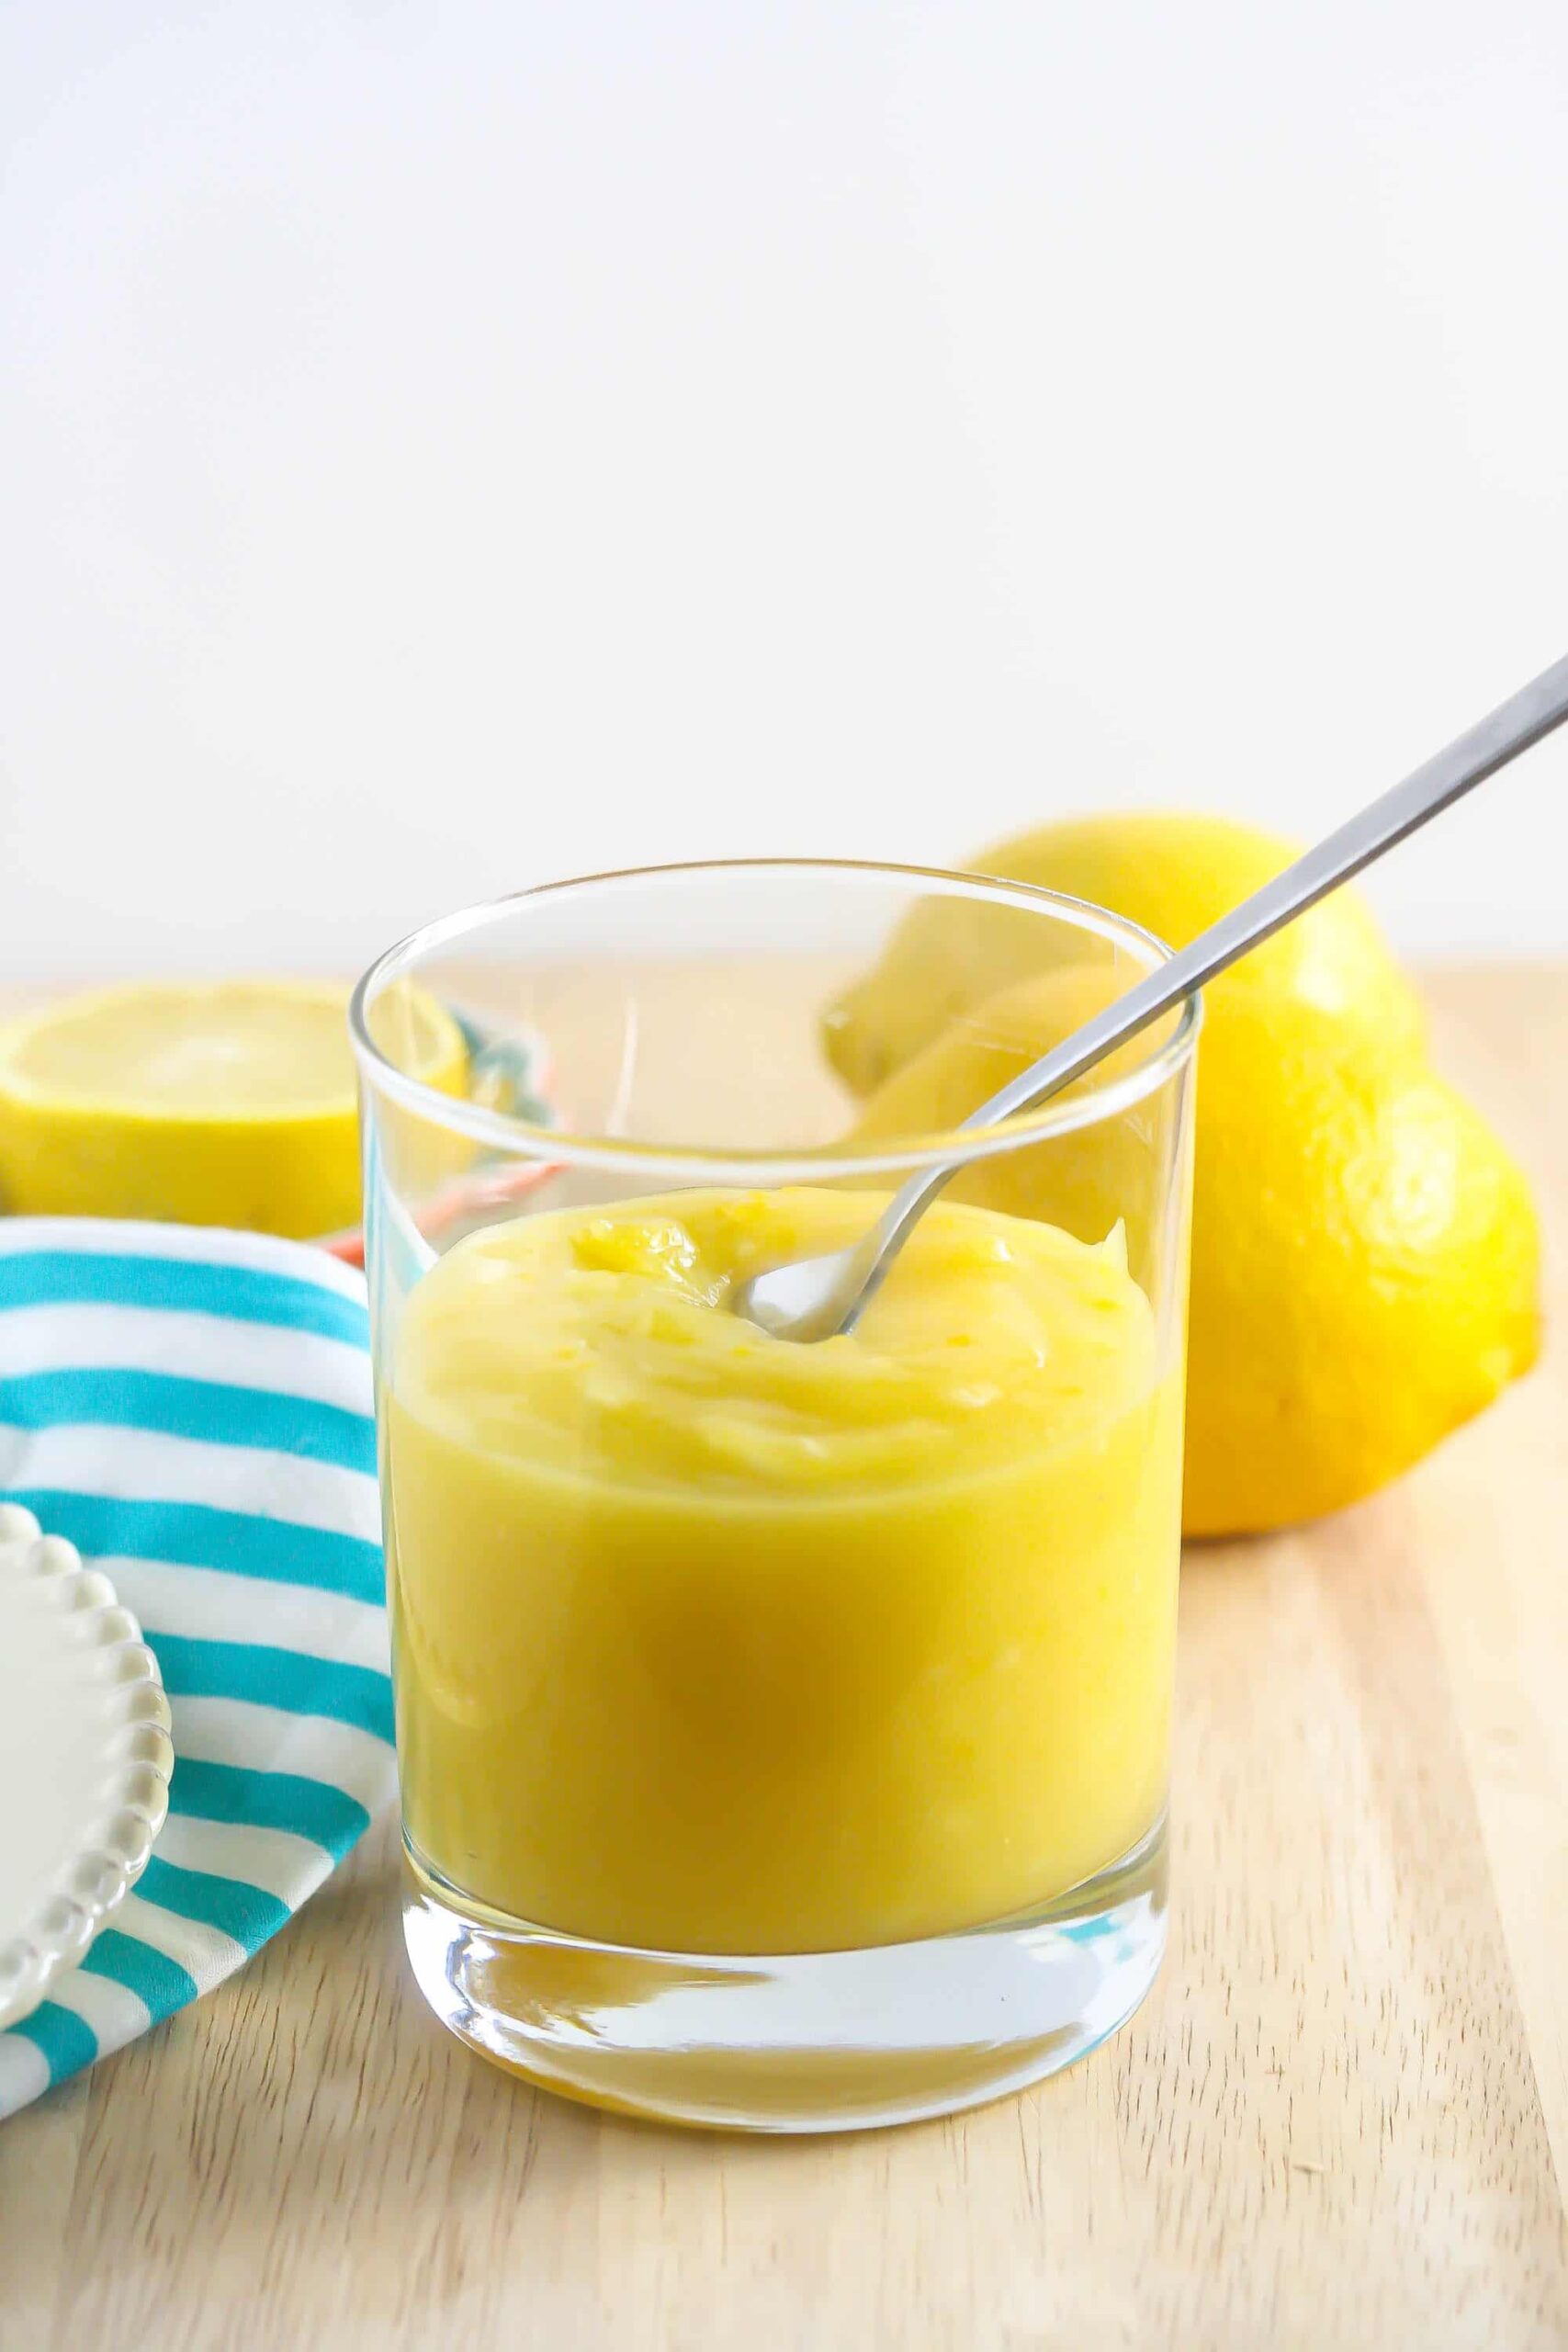 Lemon Curd in a glass with a spoon coming out of it.